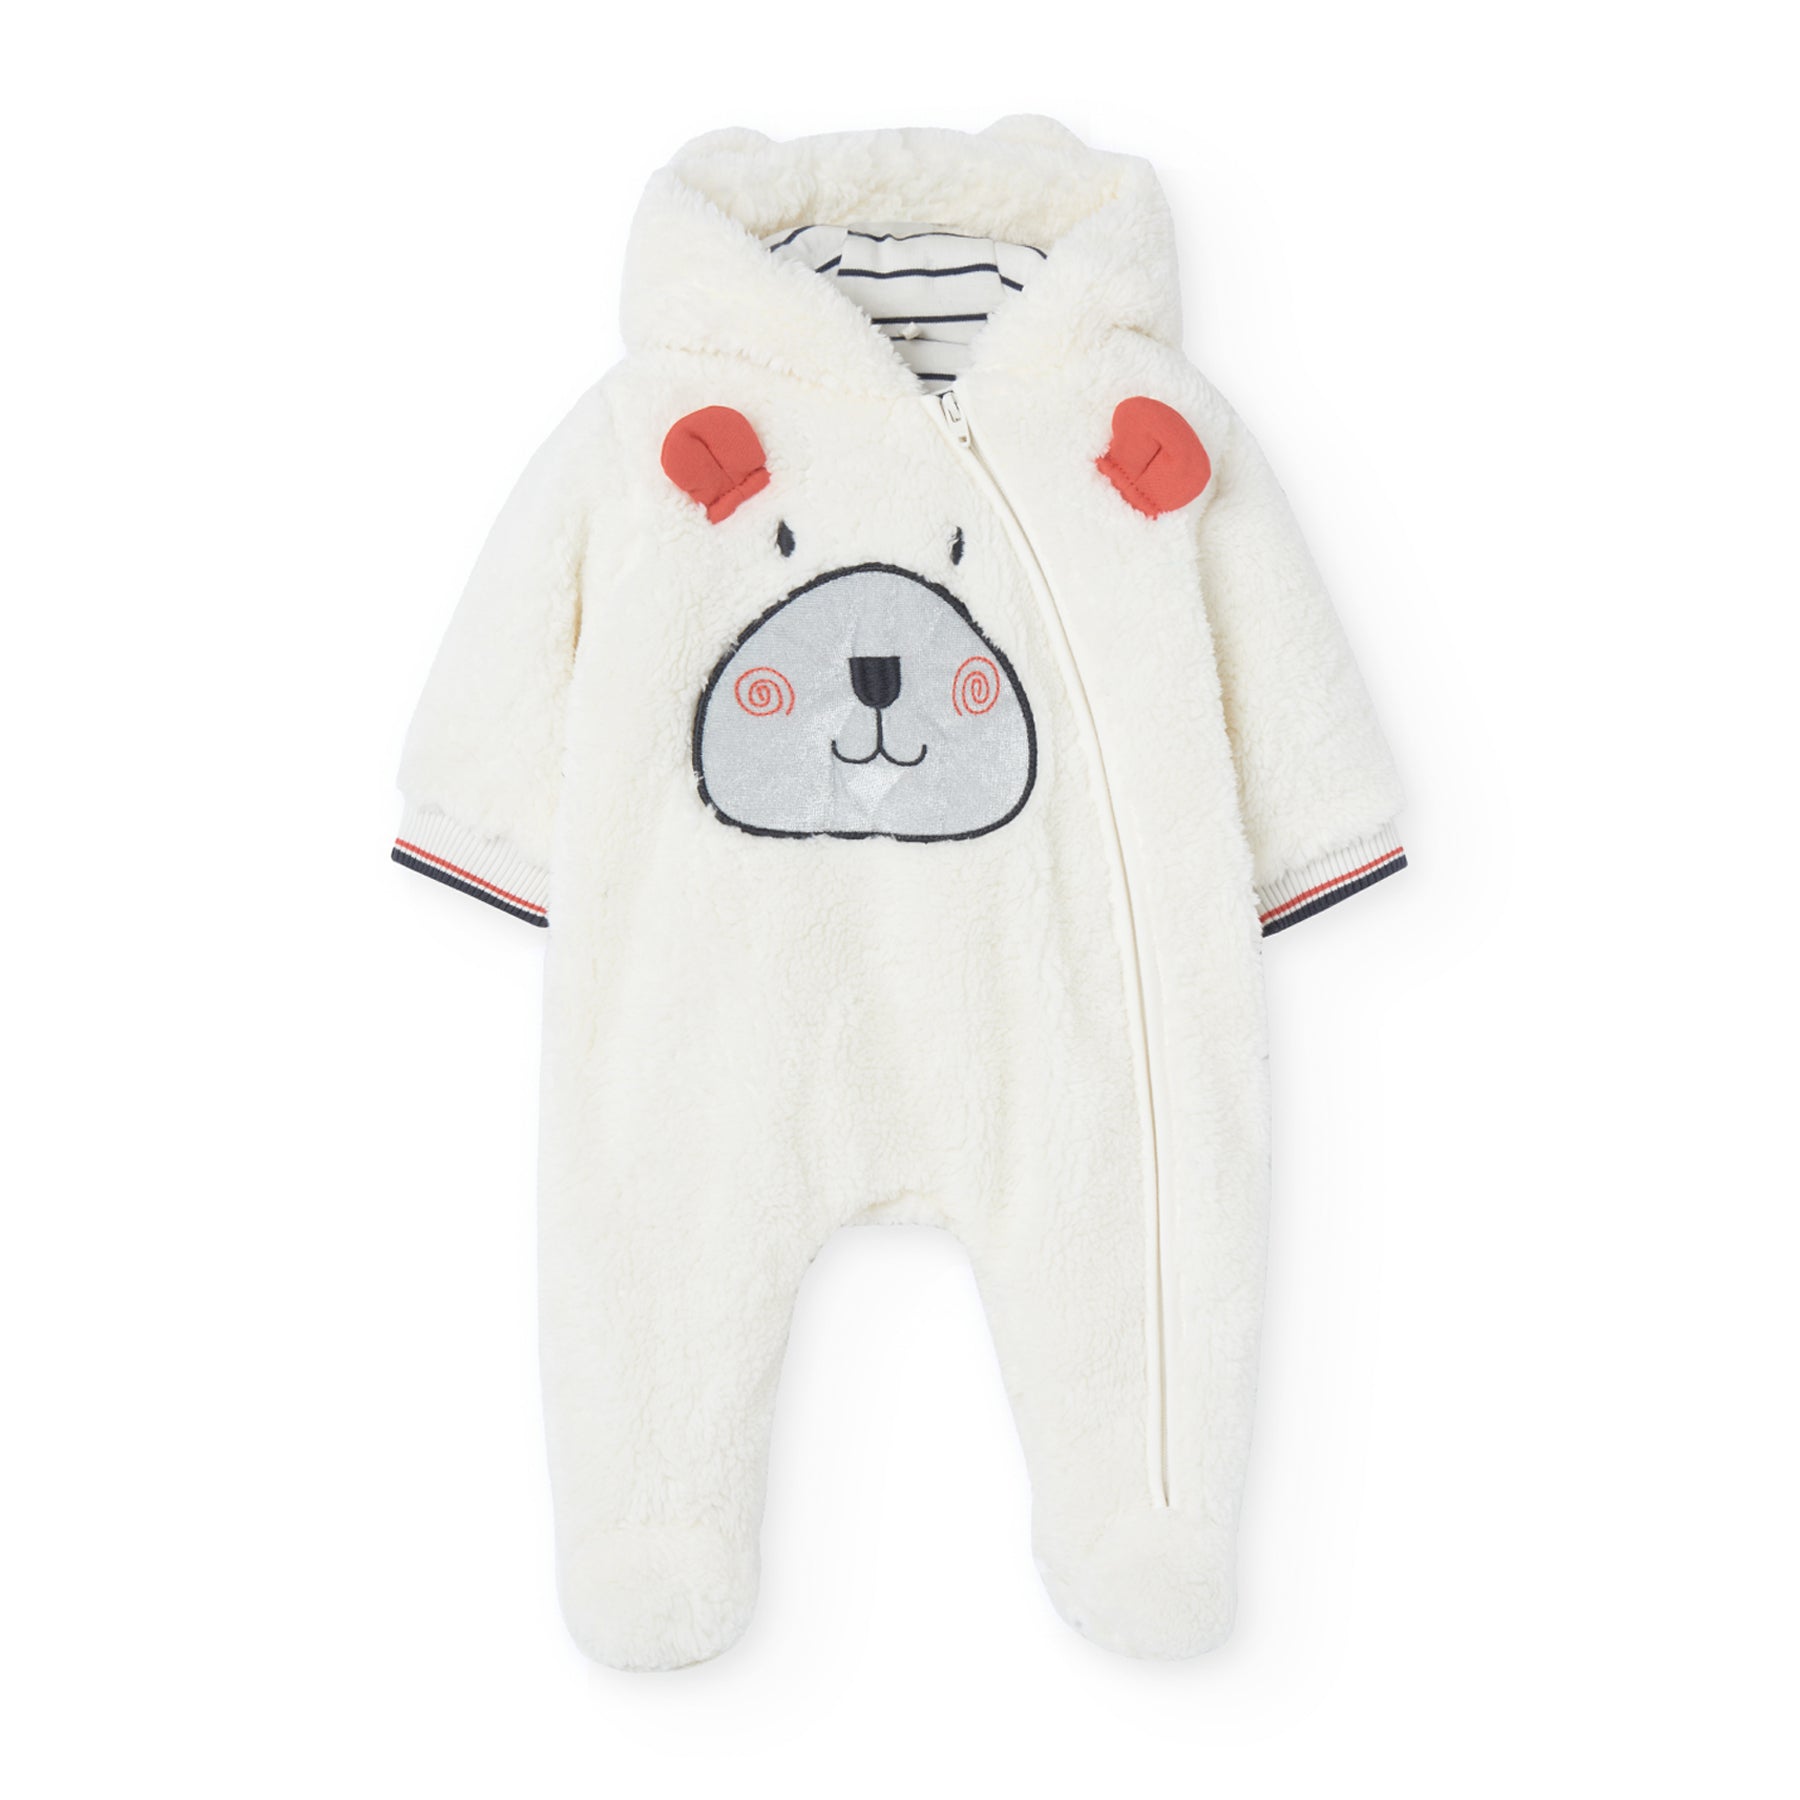 Boboli Winter Outerwear for Babies at Bonjour Baby Baskets